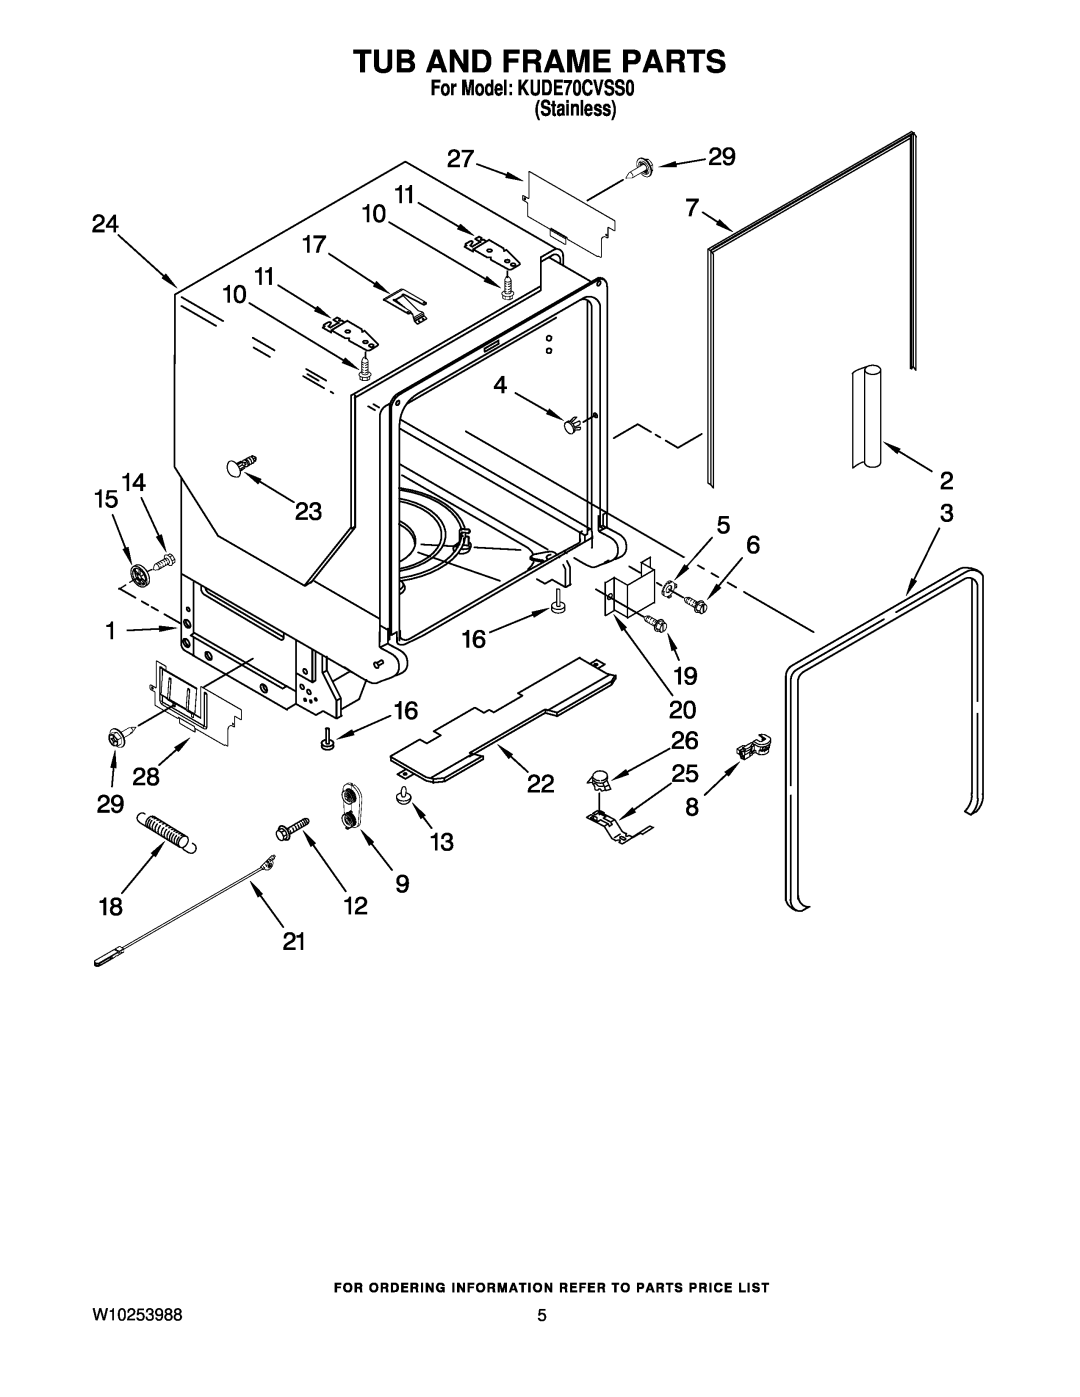 KitchenAid manual Tub And Frame Parts, W10253988, For Model KUDE70CVSS0 Stainless 